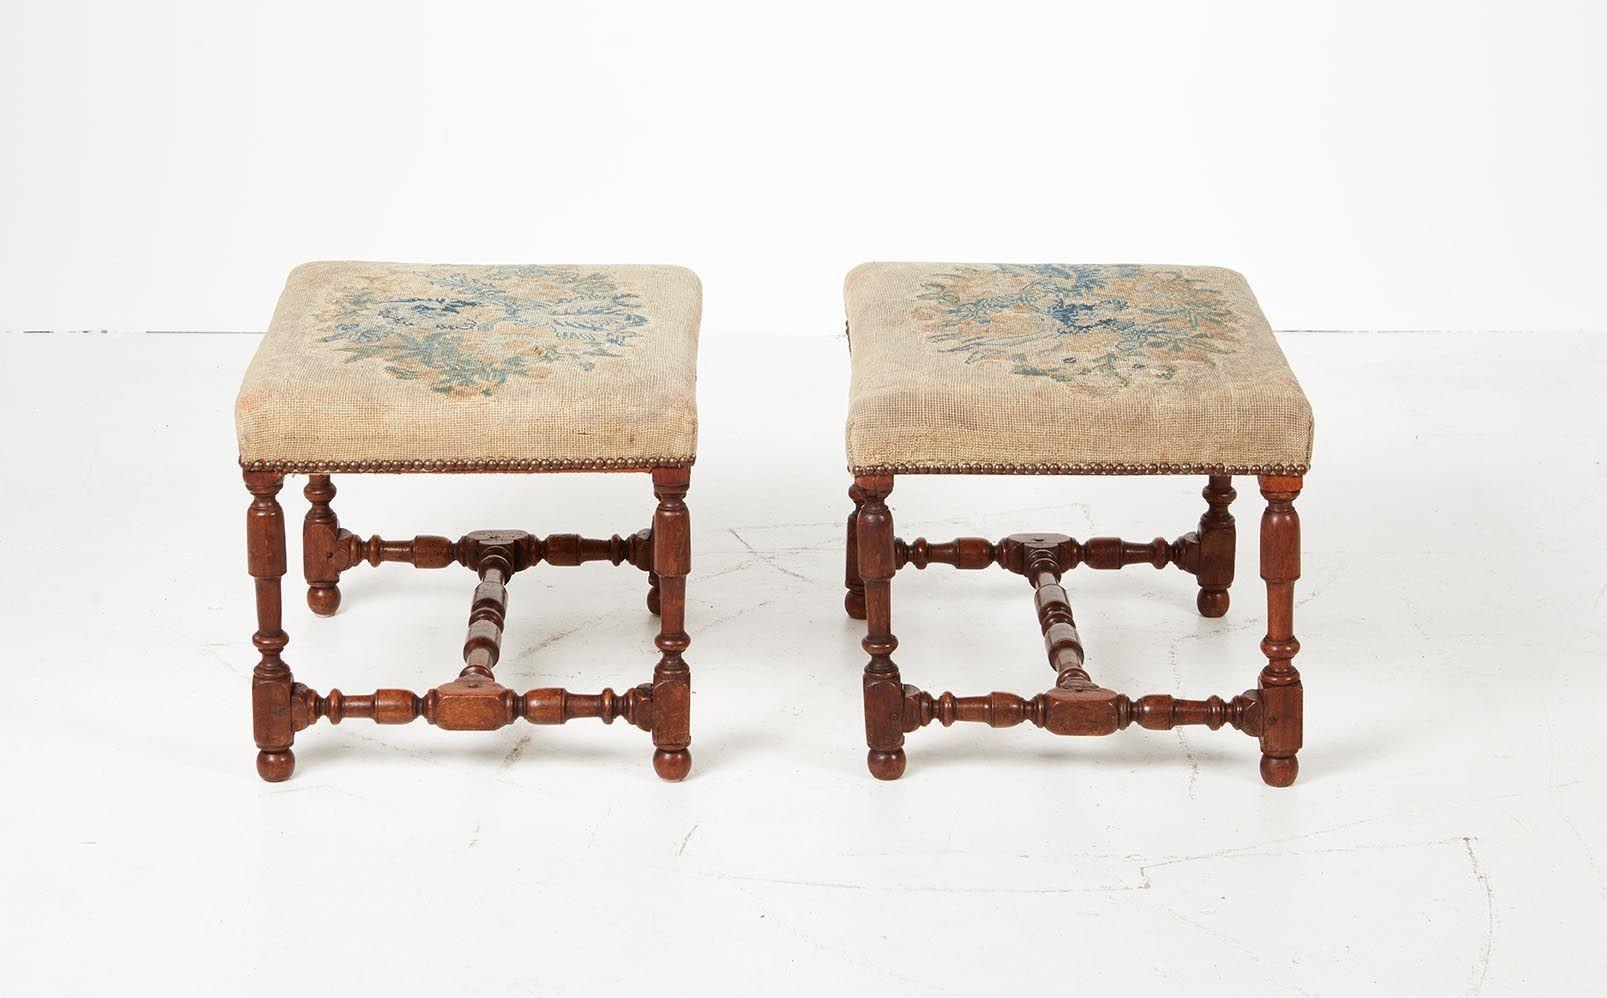 Rare pair of late 17th century Italian baroque walnut benches, the needlework upholstered seat over turned legs joined by similarly turned stretchers, possessing good nutty color and patination.